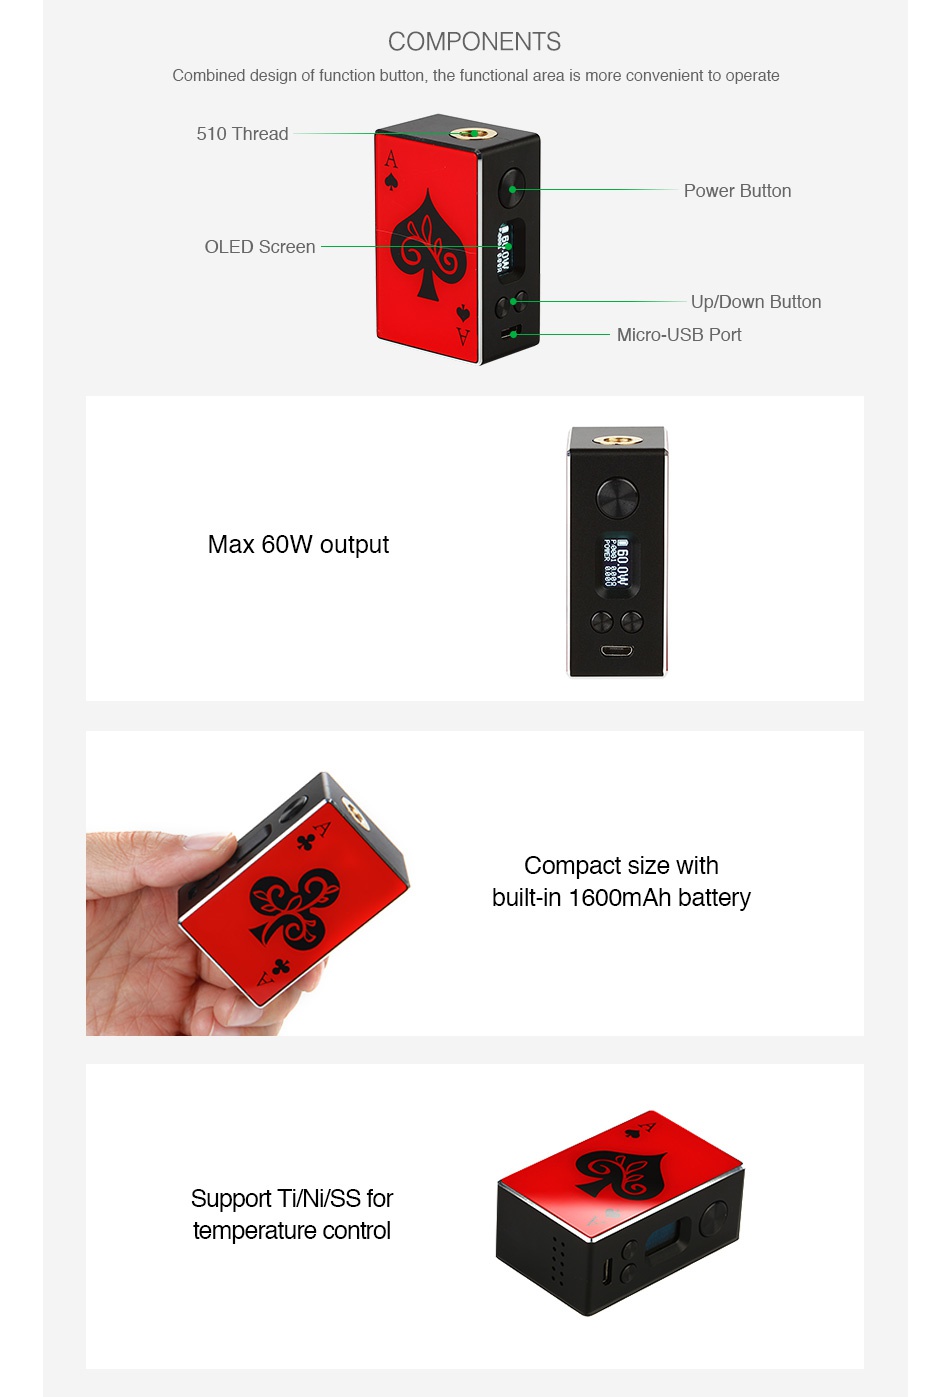 Avidartisan Gamblers 60W TC MOD 1600mAh COMPONENTS Combined design of function button  the functional area is more convenient to operate 510 Thread Power Button OLED Screen Up Down Button Micro USB Port Max 6ow output   Compact size with built in 1600mAh battery Support TI Ni SS for temperature control